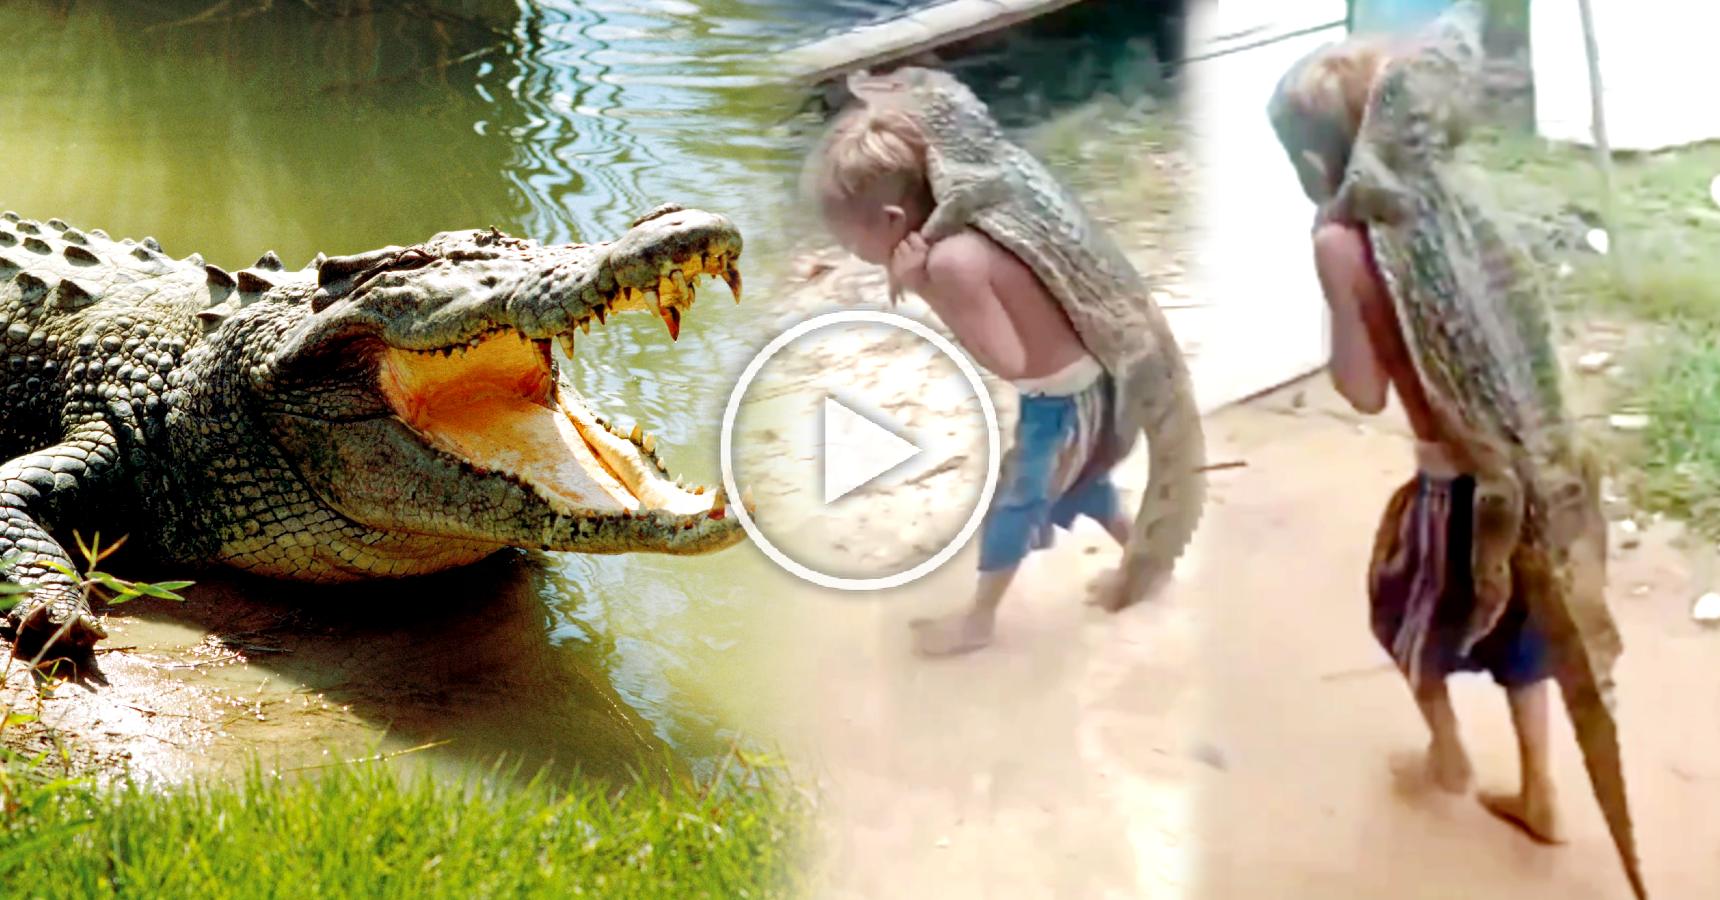 Little boy carrying a crocodile on his back, video goes viral on social media